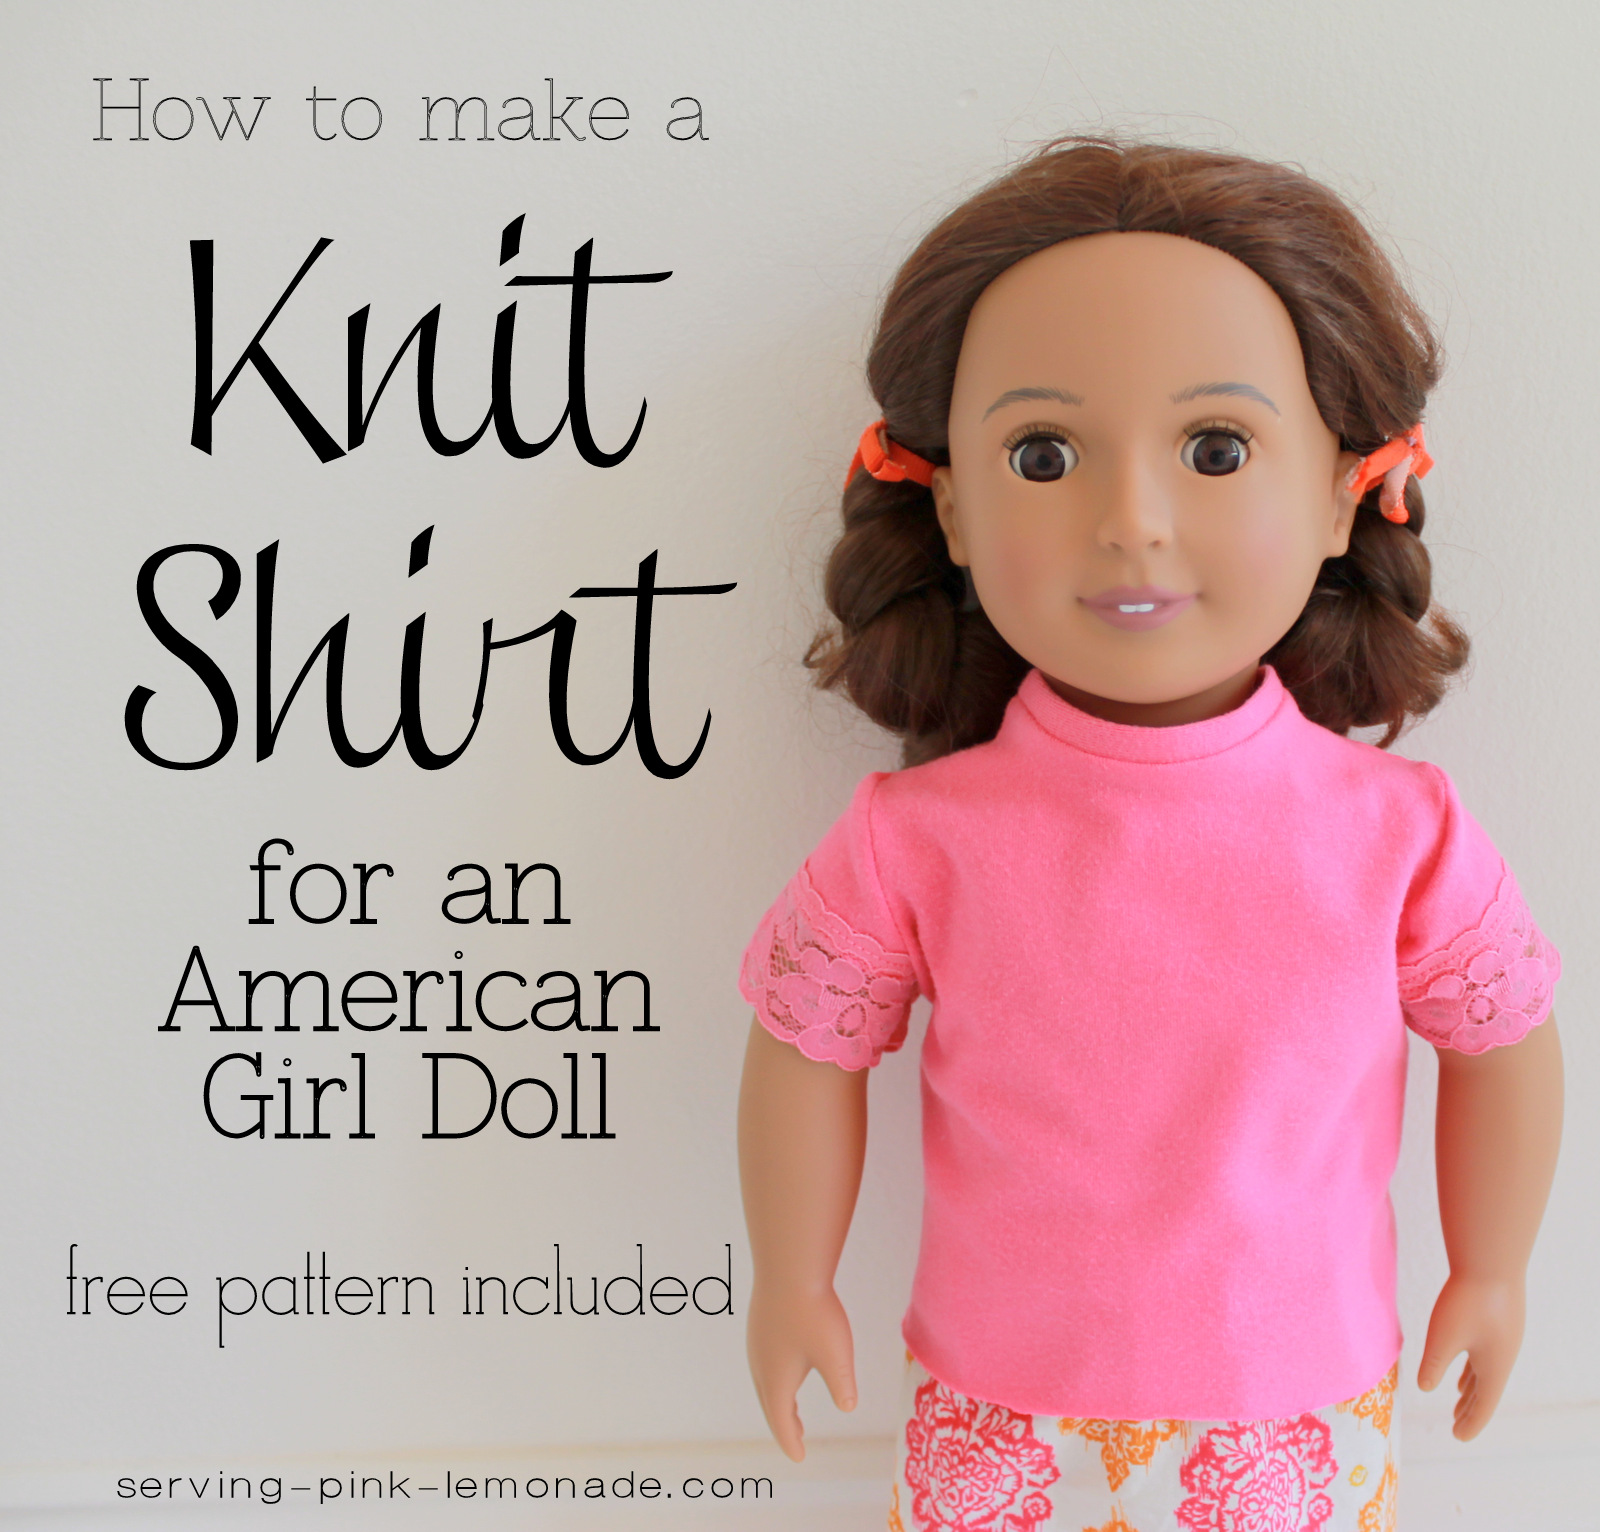 Serving Pink Lemonade: How to Sew a Shirt for an 18 Inch Doll